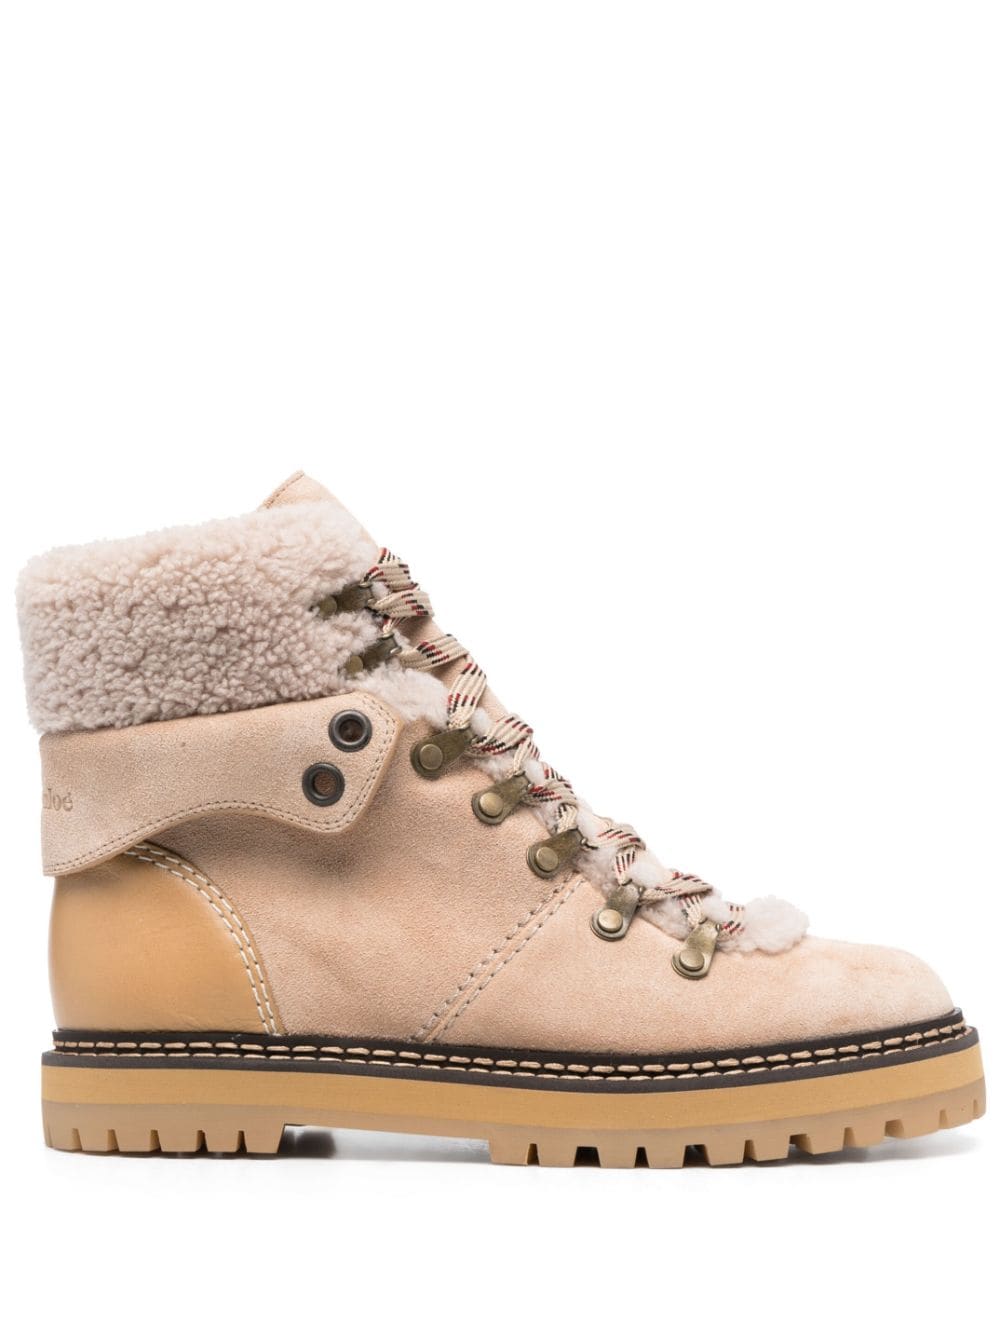 See by Chloé Eilieen shearling leather ankle boots - Neutrals von See by Chloé